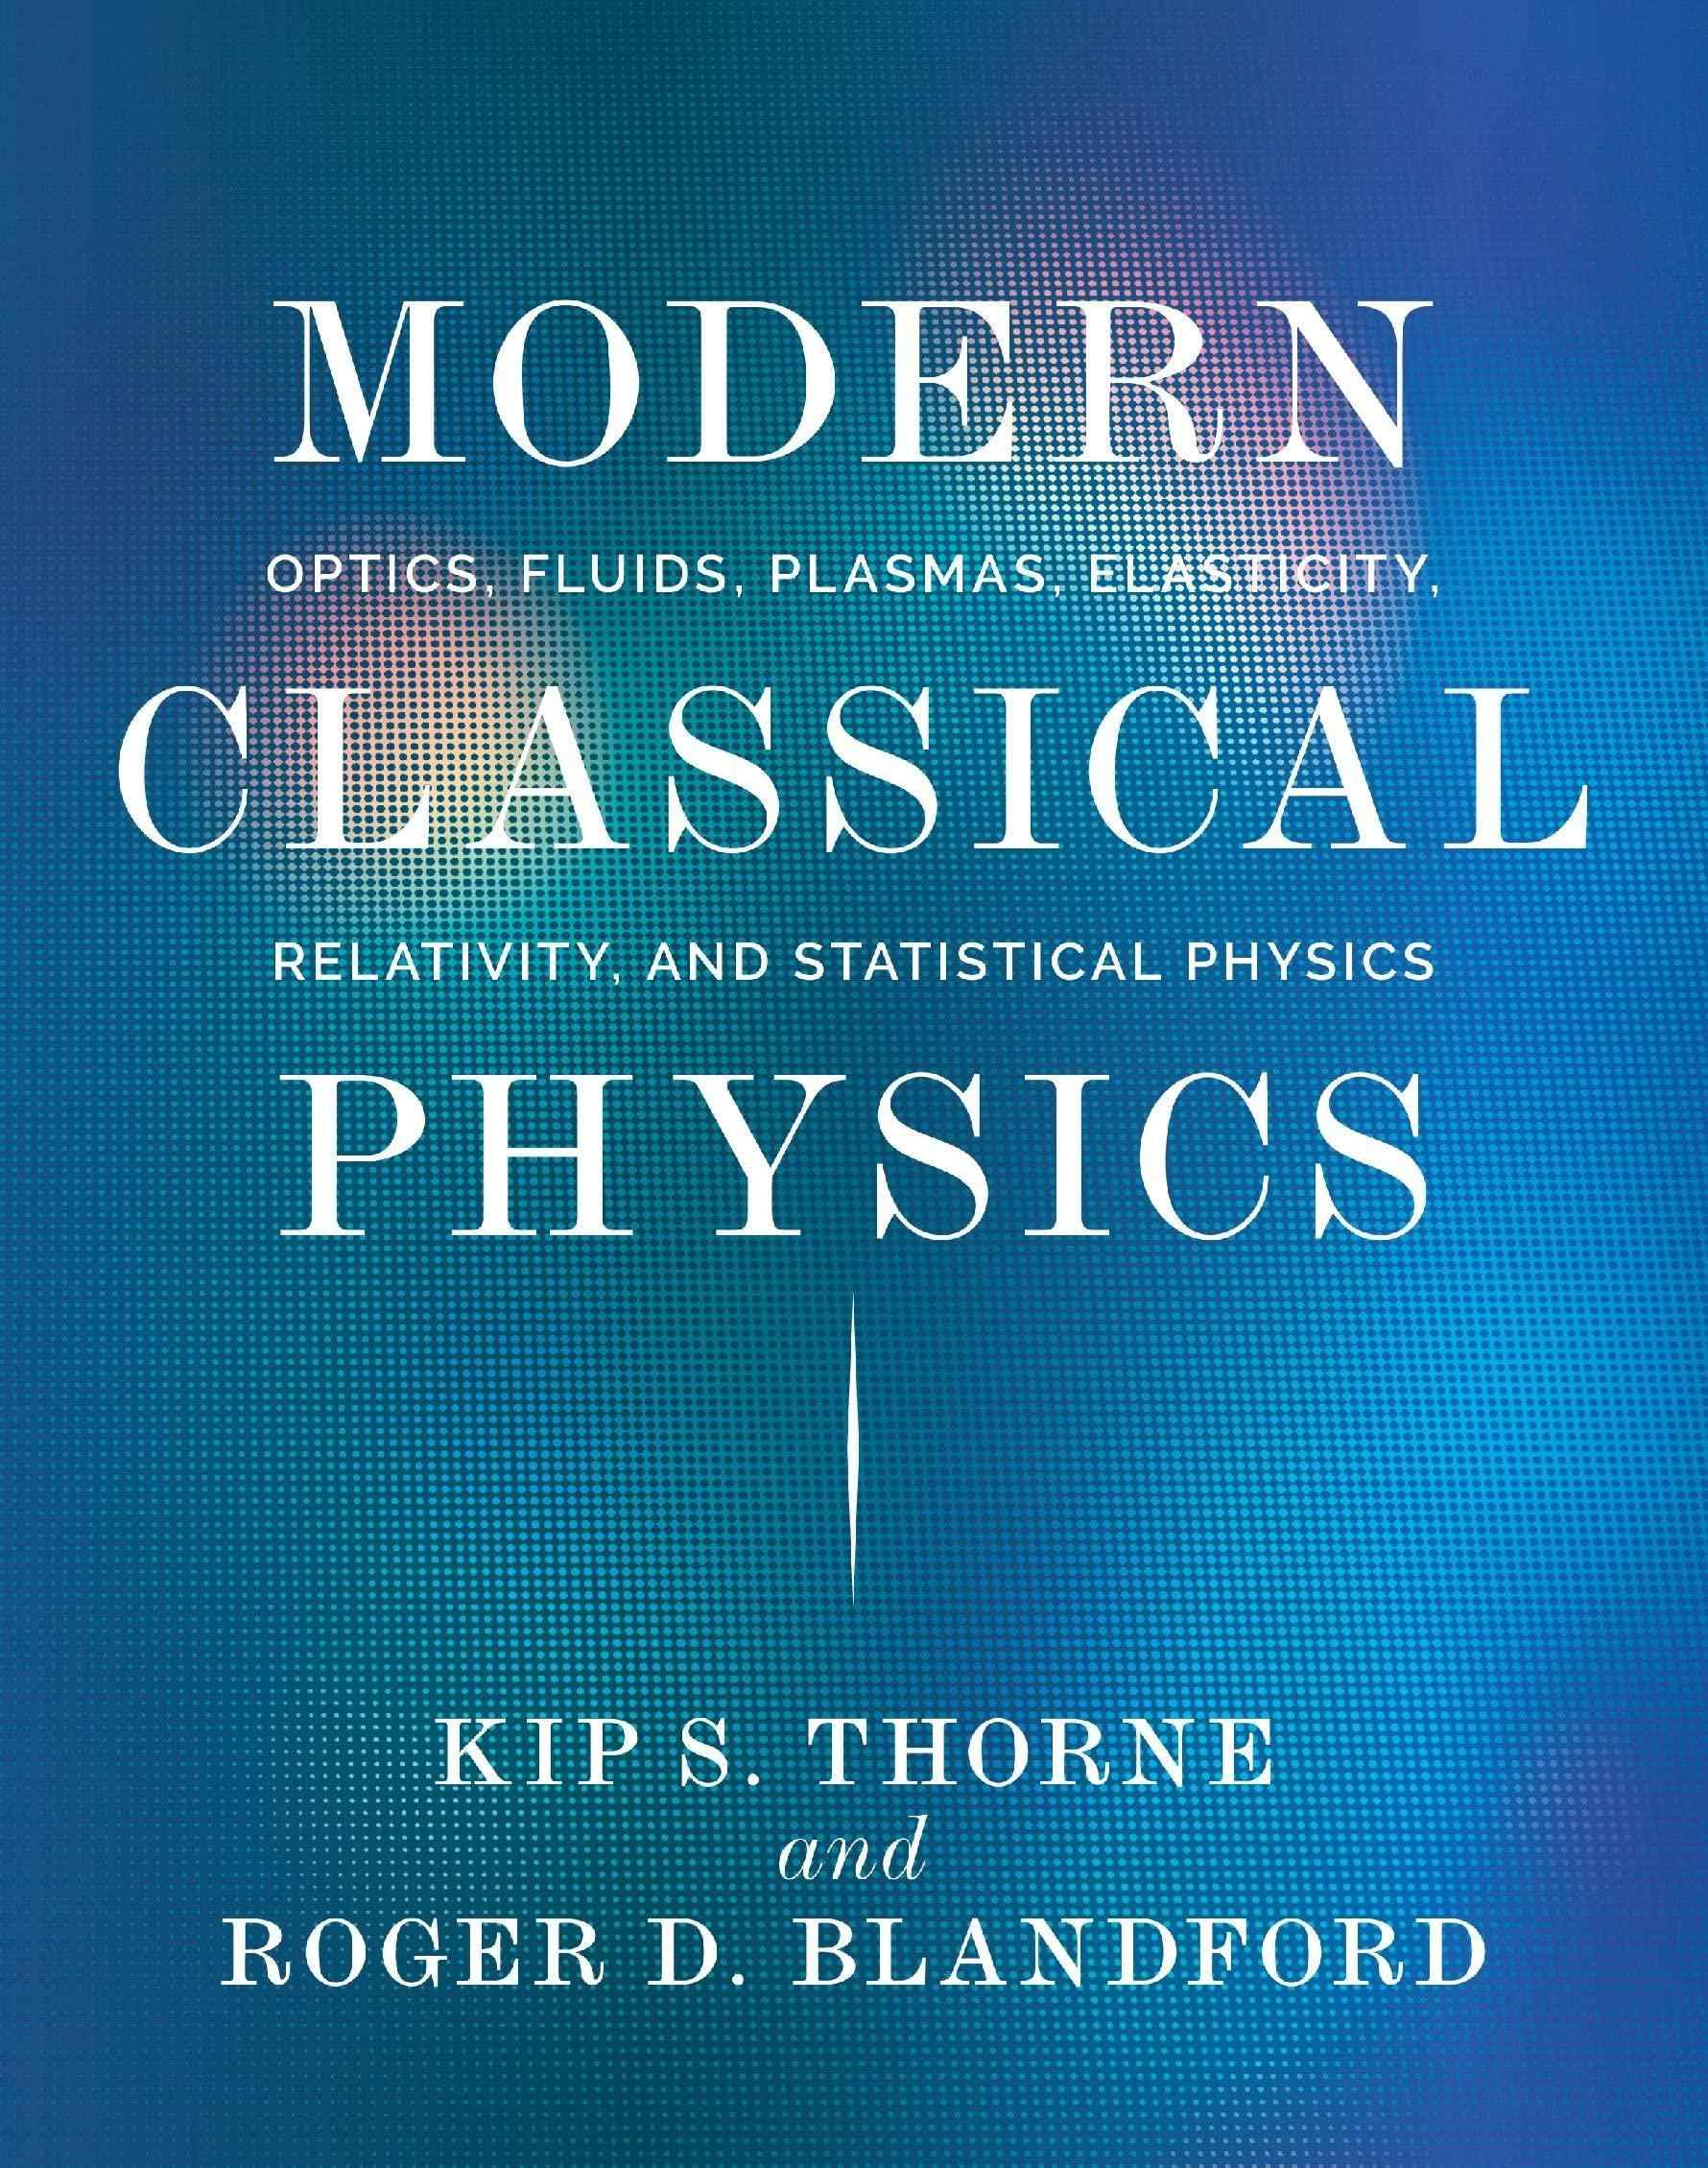 Modern Classical Physics Optics Fluids Plasmas Elasticity Relativity And Statistical Physics Textbook Questions And Answers